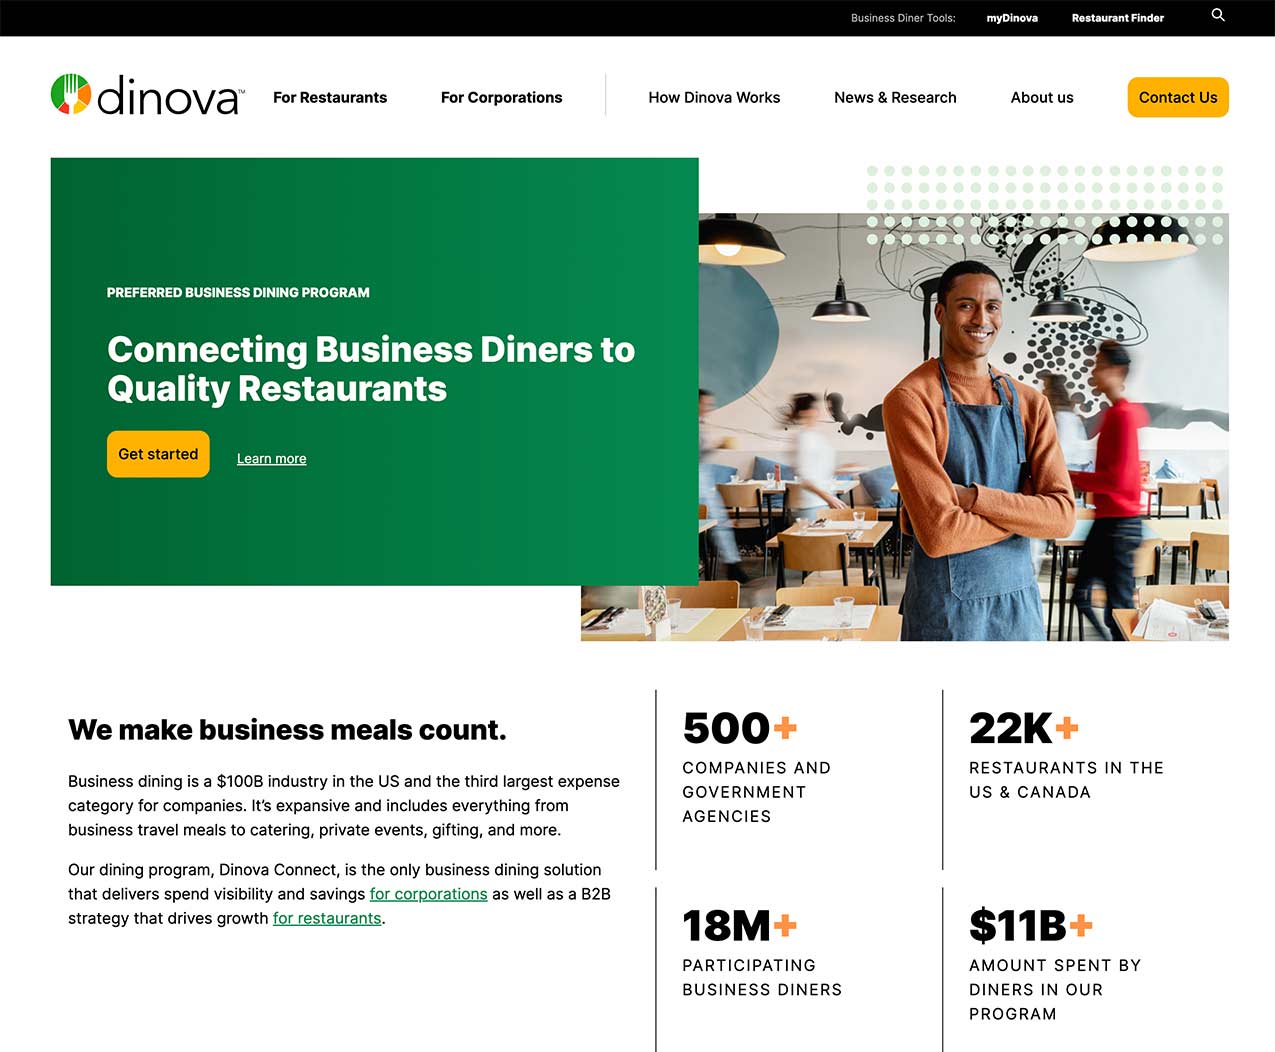 Image of dinova.com homepage featuring hero image of a man in an apron, a tagline that reads 'Connecting Business Diners to Quality Restaurants' and various business statistics.